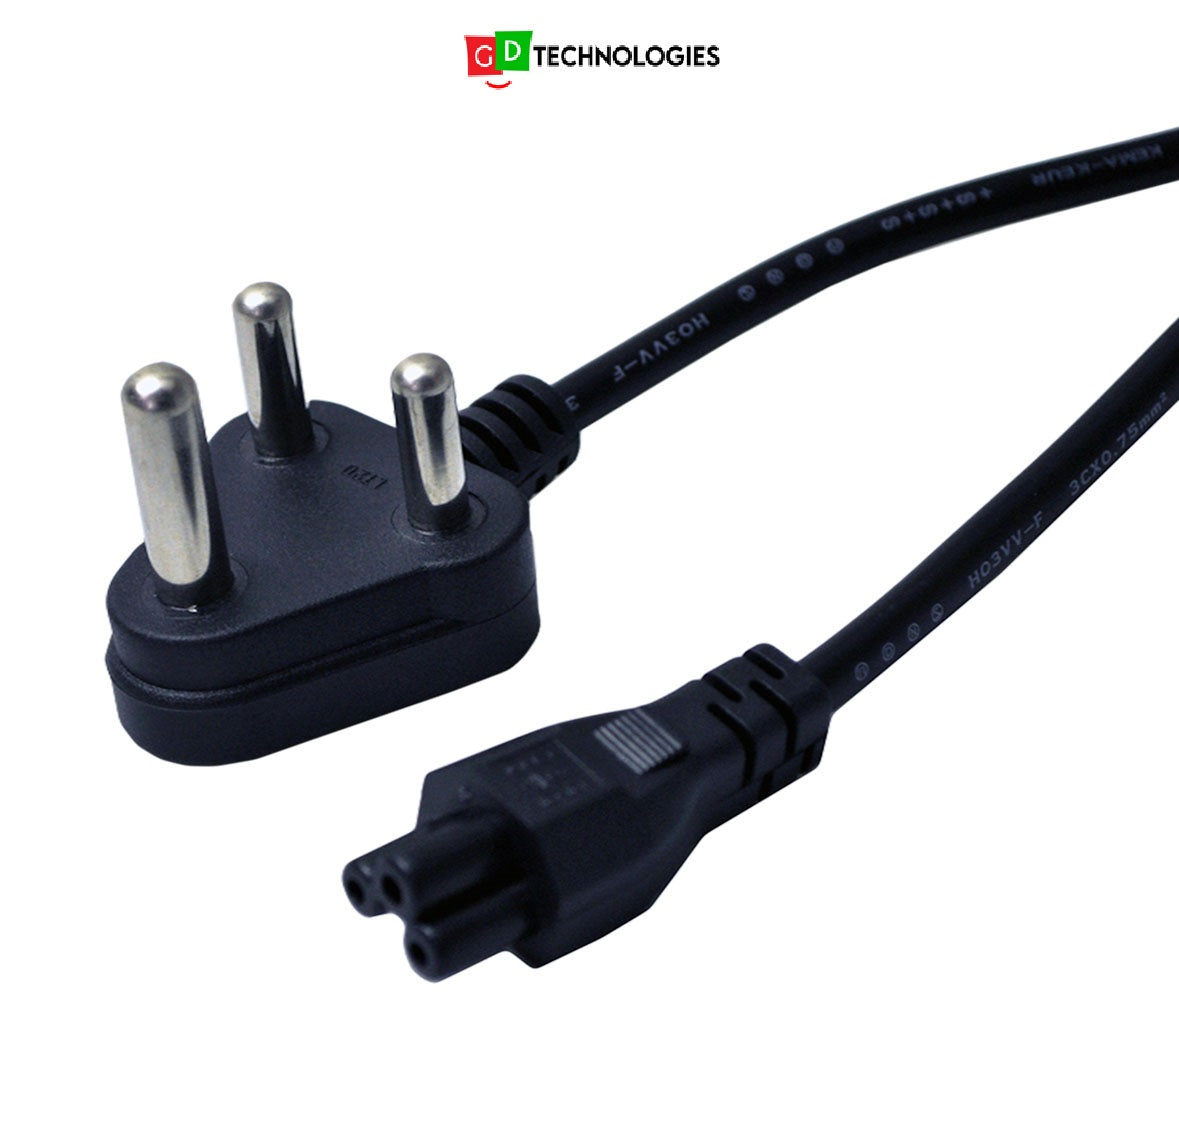 POWER CABLE 1.8M CLOVER 16A BLACK